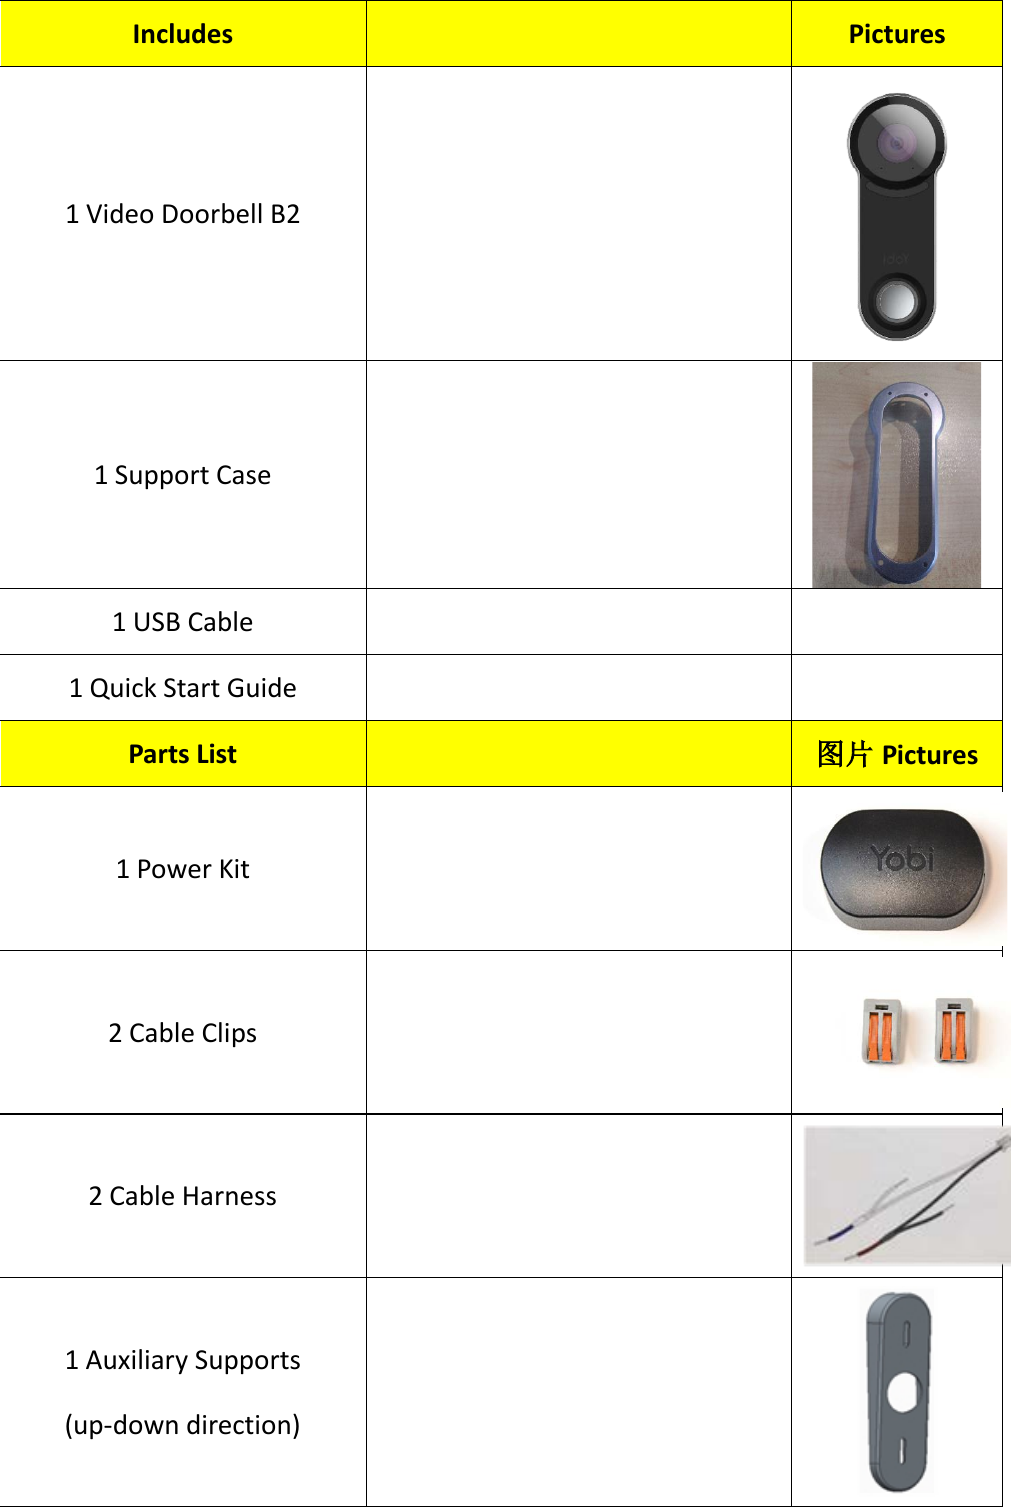 Includes    Pictures 1 Video Doorbell B2    1 Support Case    1 USB Cable     1 Quick Start Guide     Parts List   图片Pictures 1 Power Kit    2 Cable Clips    2 Cable Harness    1 Auxiliary Supports (up-down direction)   